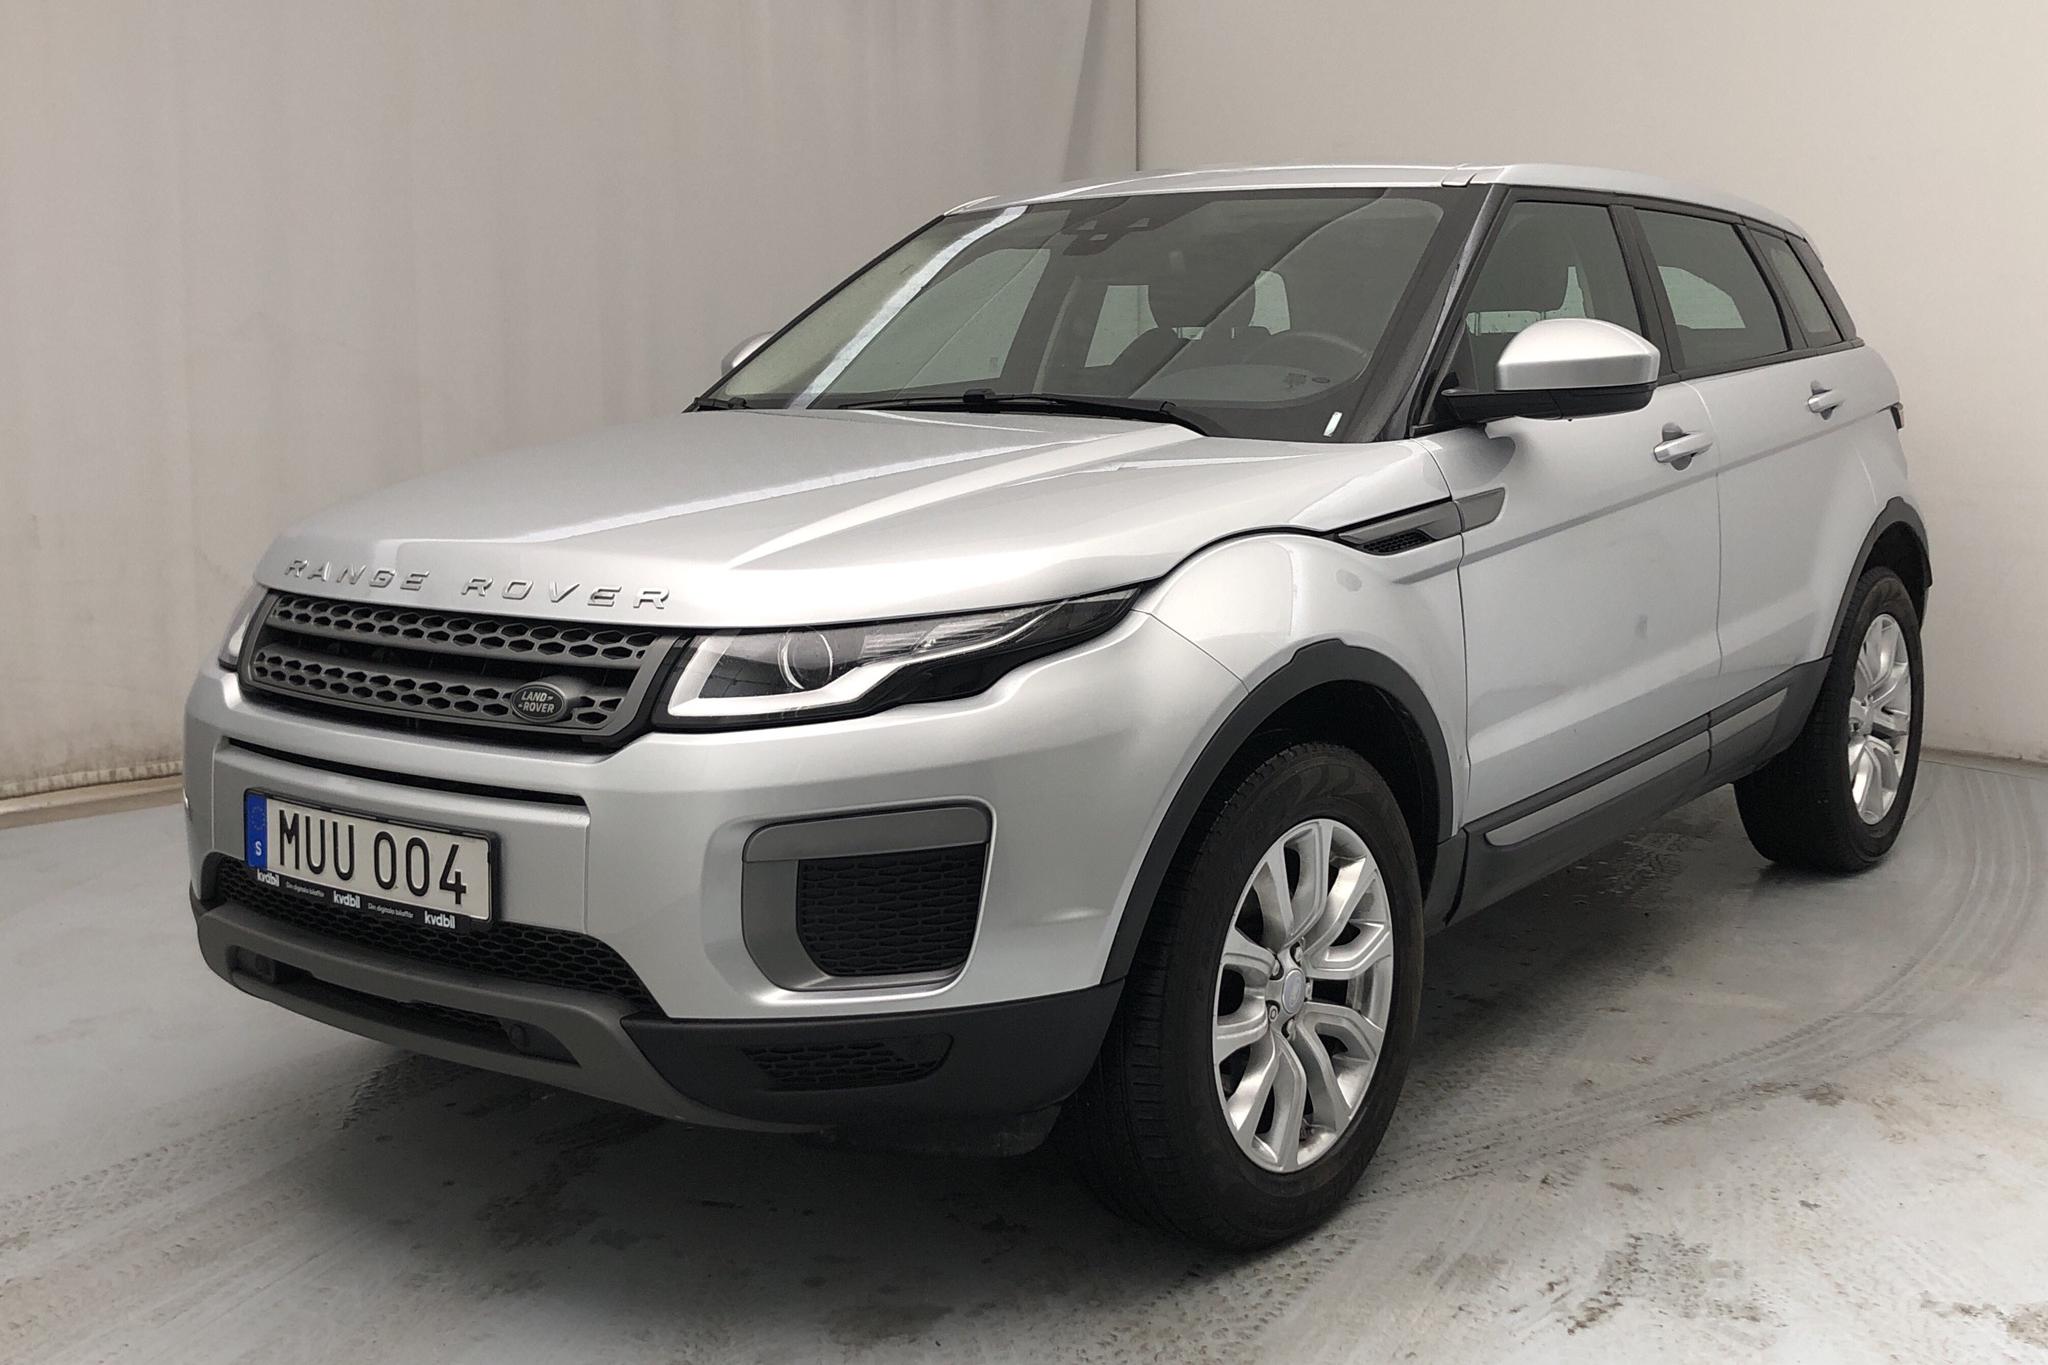 Land Rover Range Rover Evoque 2.0 TD4 AWD 5dr (150hk) - 88 460 km - Automatic - gray - 2016